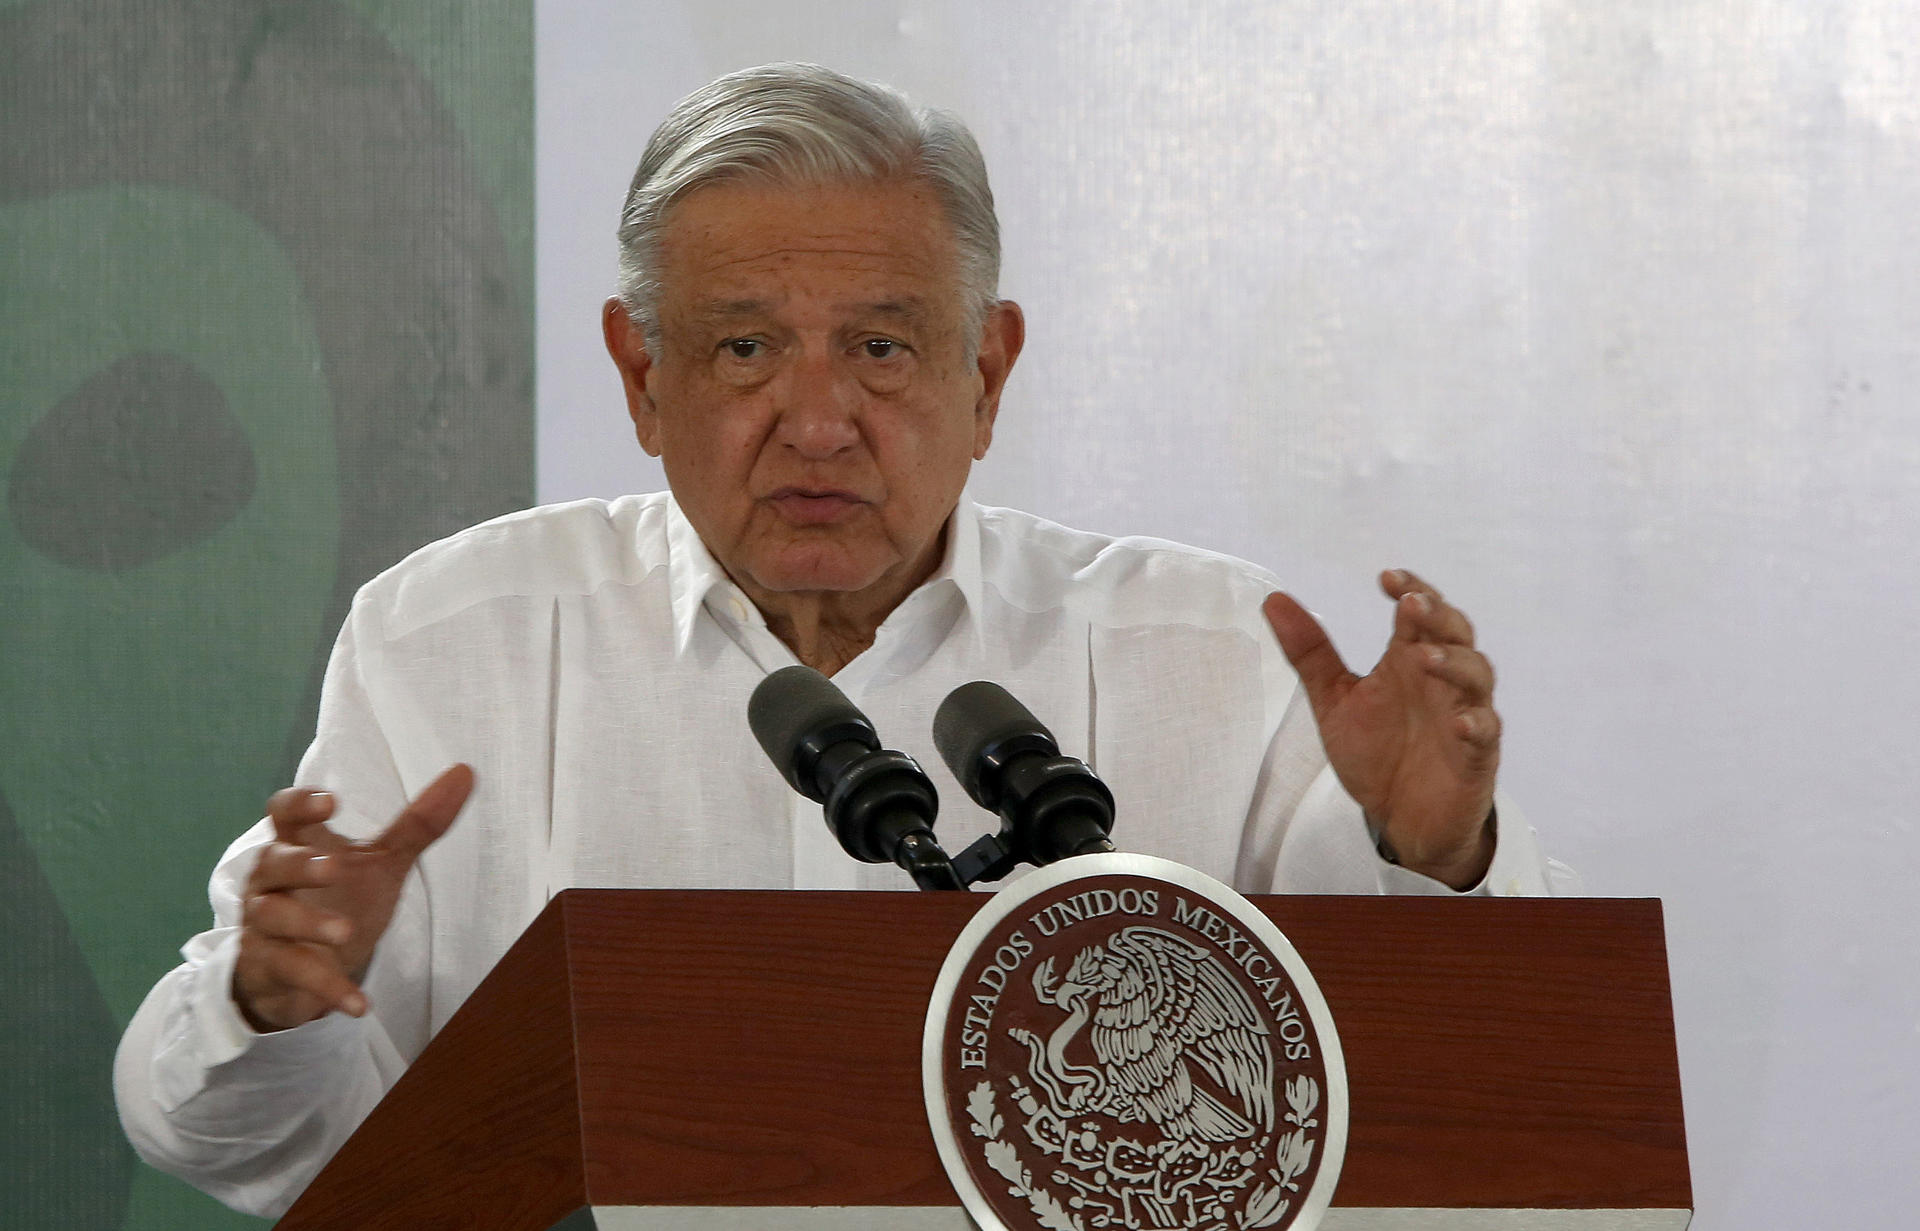 Mexican President Andres Manuel Lopez Obrador speaks during a morning press conference in the resort of Cancun, Quintana Roo, Mexico. Mexican President Andrés Manuel López Obrador said Friday that U.S. officials were "satisfied and surprised" with Mexico's fight against fentanyl during the High-Level Security Dialogue between the two countries. EFE/Alonso Cupul